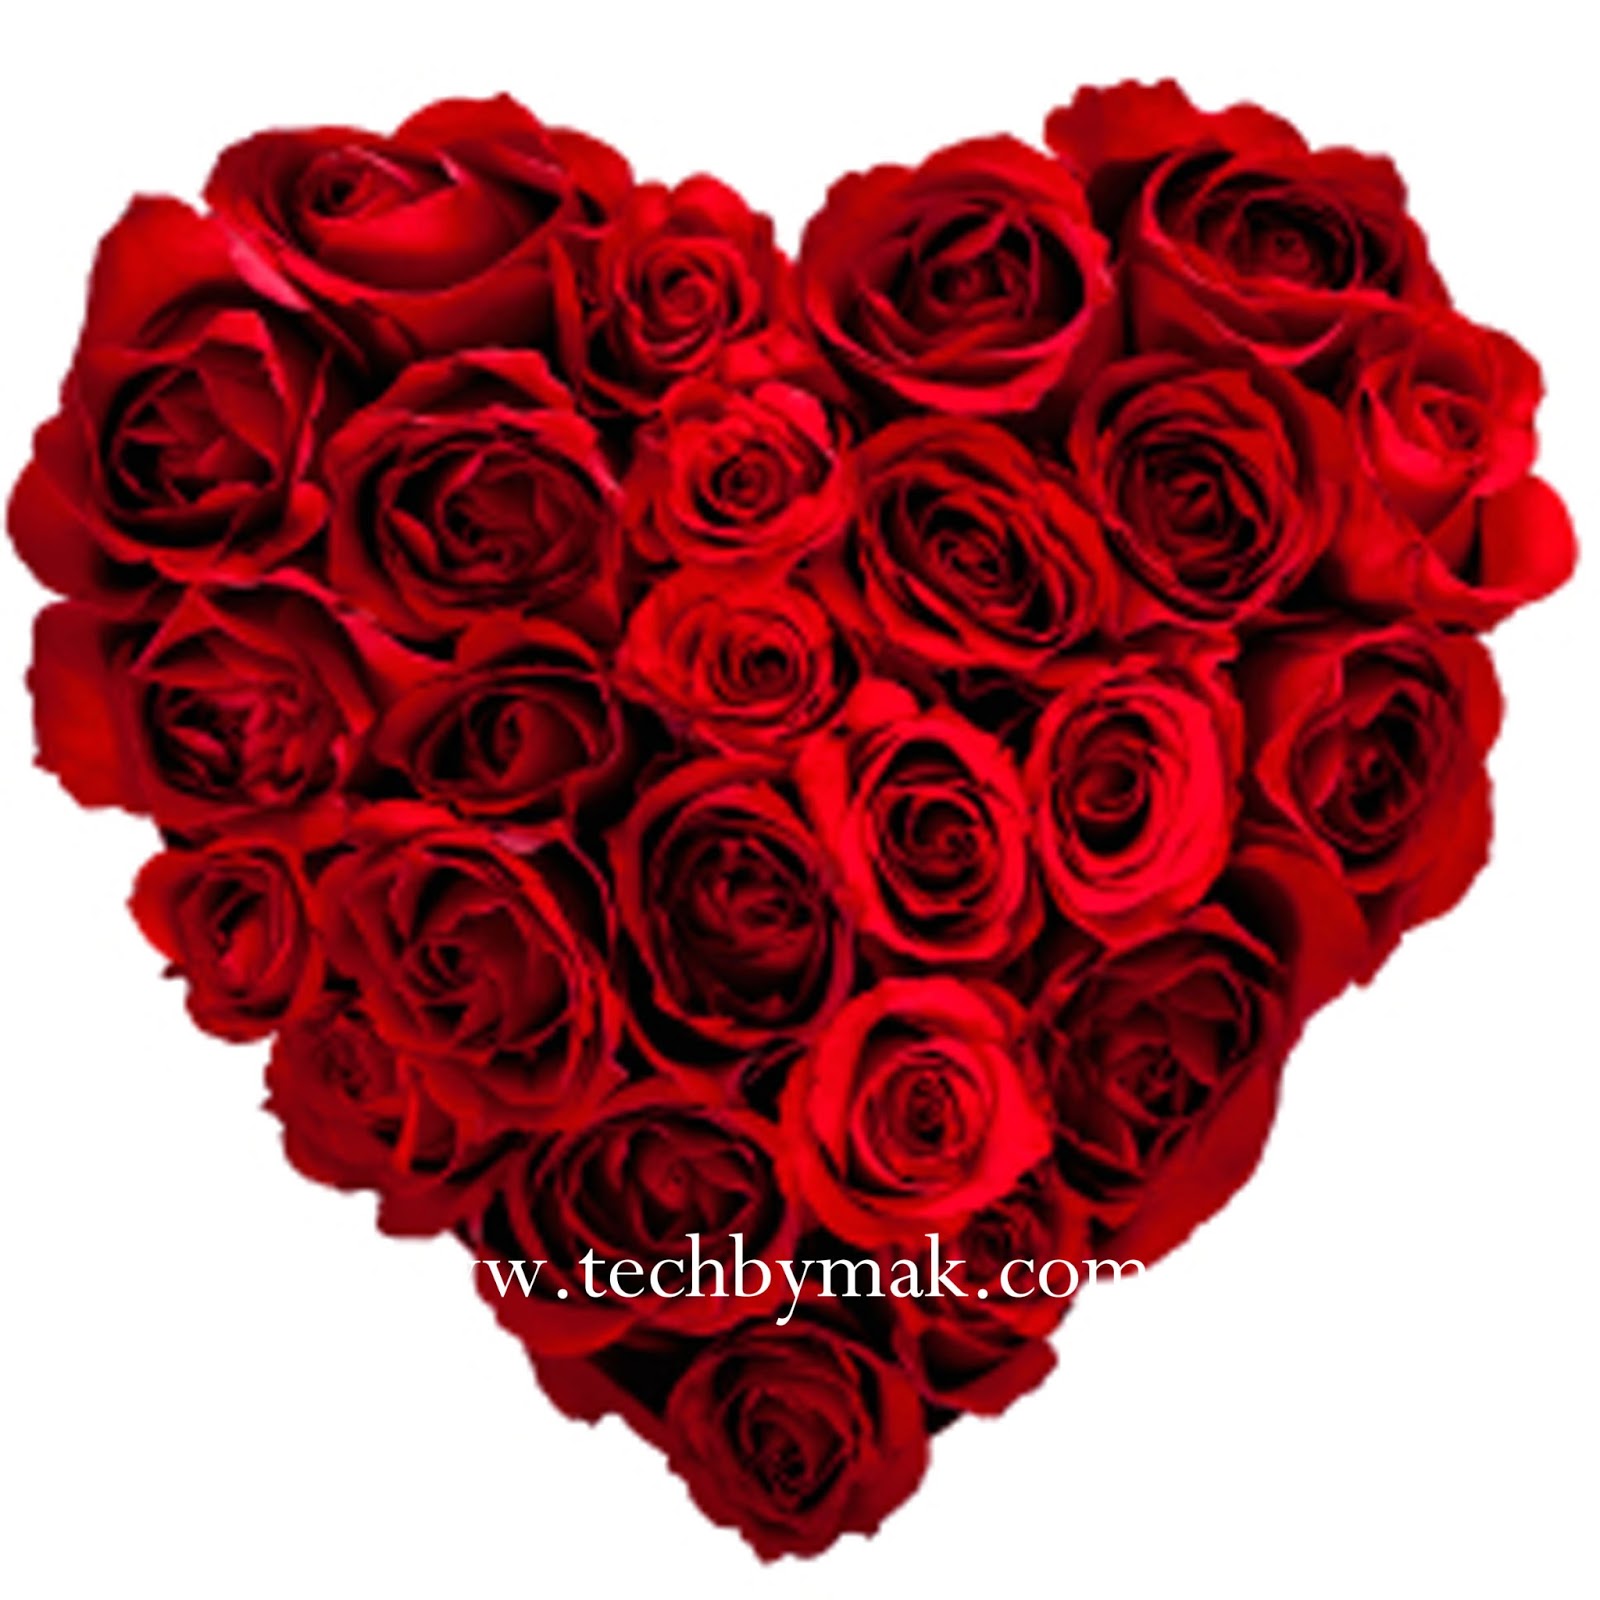 Valentines day Hearts Hd wallpapers Pictures Photos 2013 | Online ...